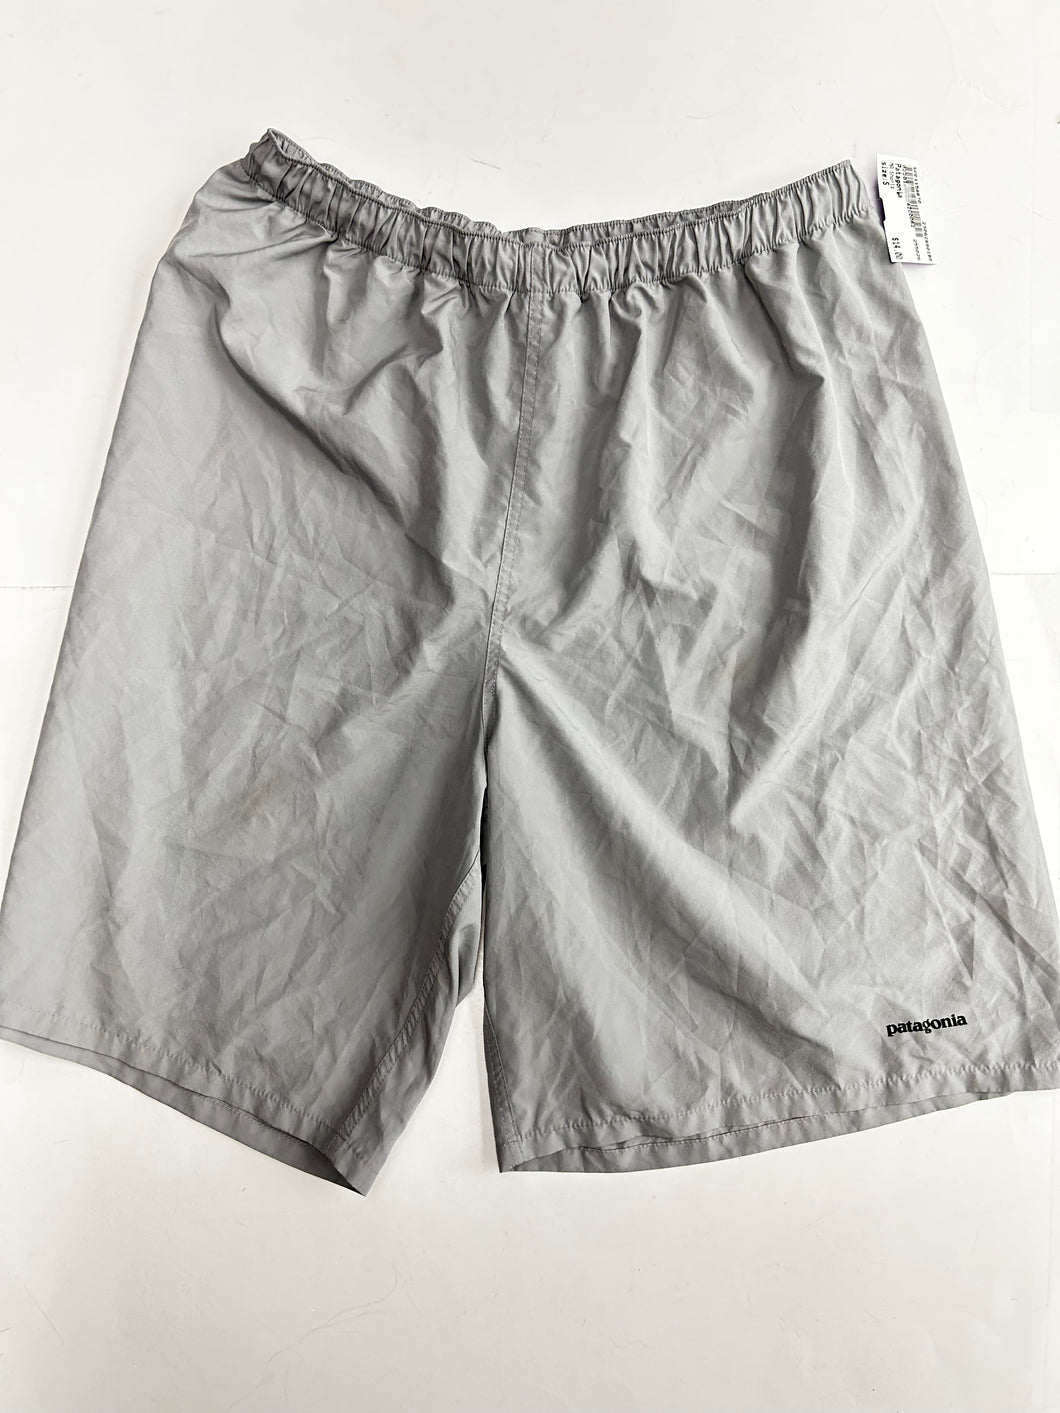 Patagonia Athletic Shorts Size Small